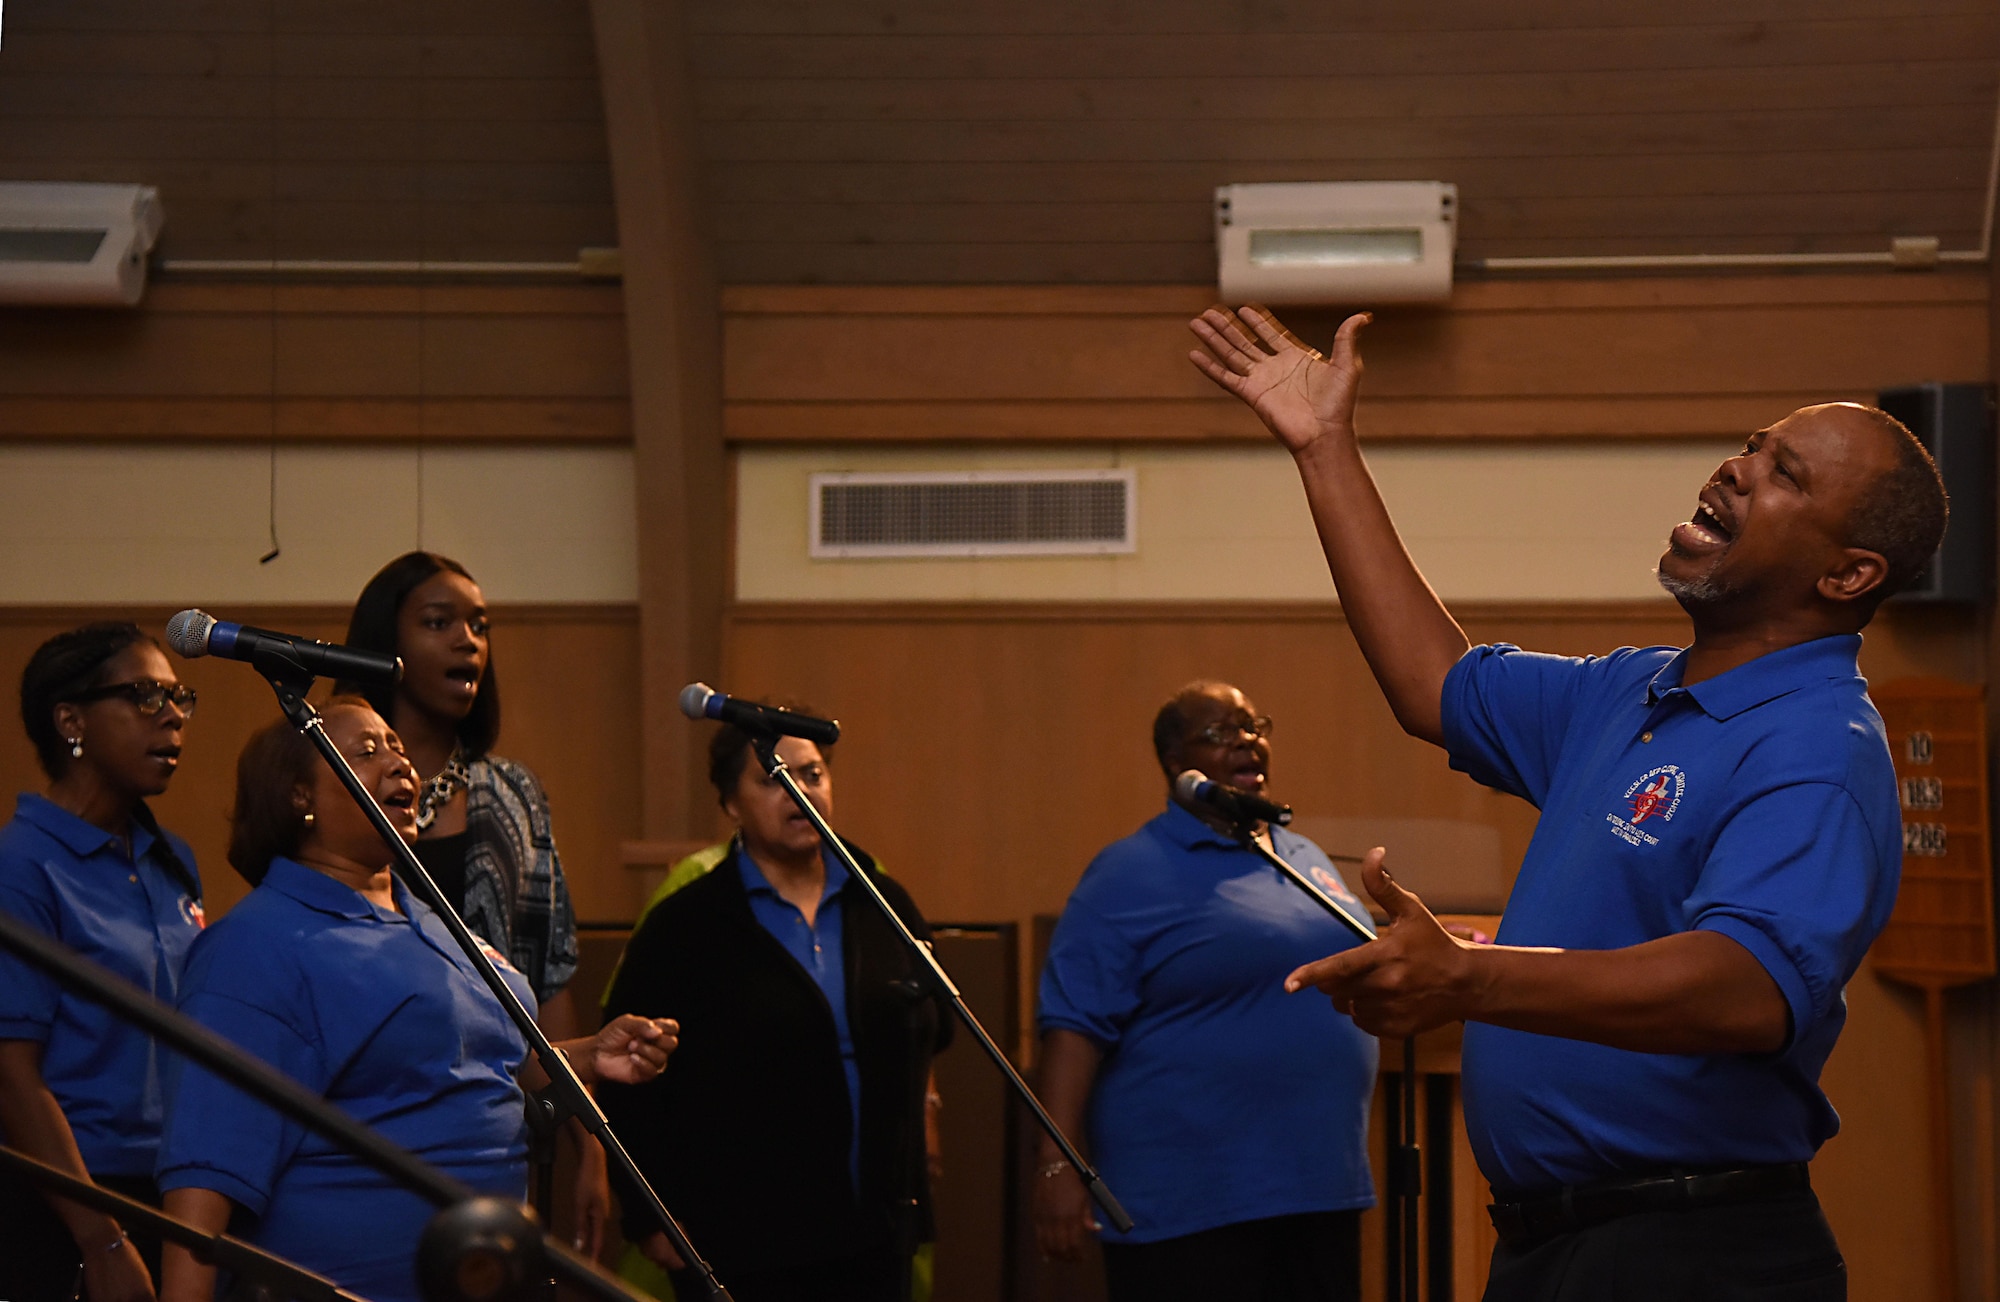 The Keesler Choir performs during the African-American Heritage Committee's Gospel Concert at the Larcher Chapel March 4, 2017, on Keesler Air Force Base, Miss. The event was held to celebrate African American History Month. (U. S. Air Force photo by Kemberly Groue)